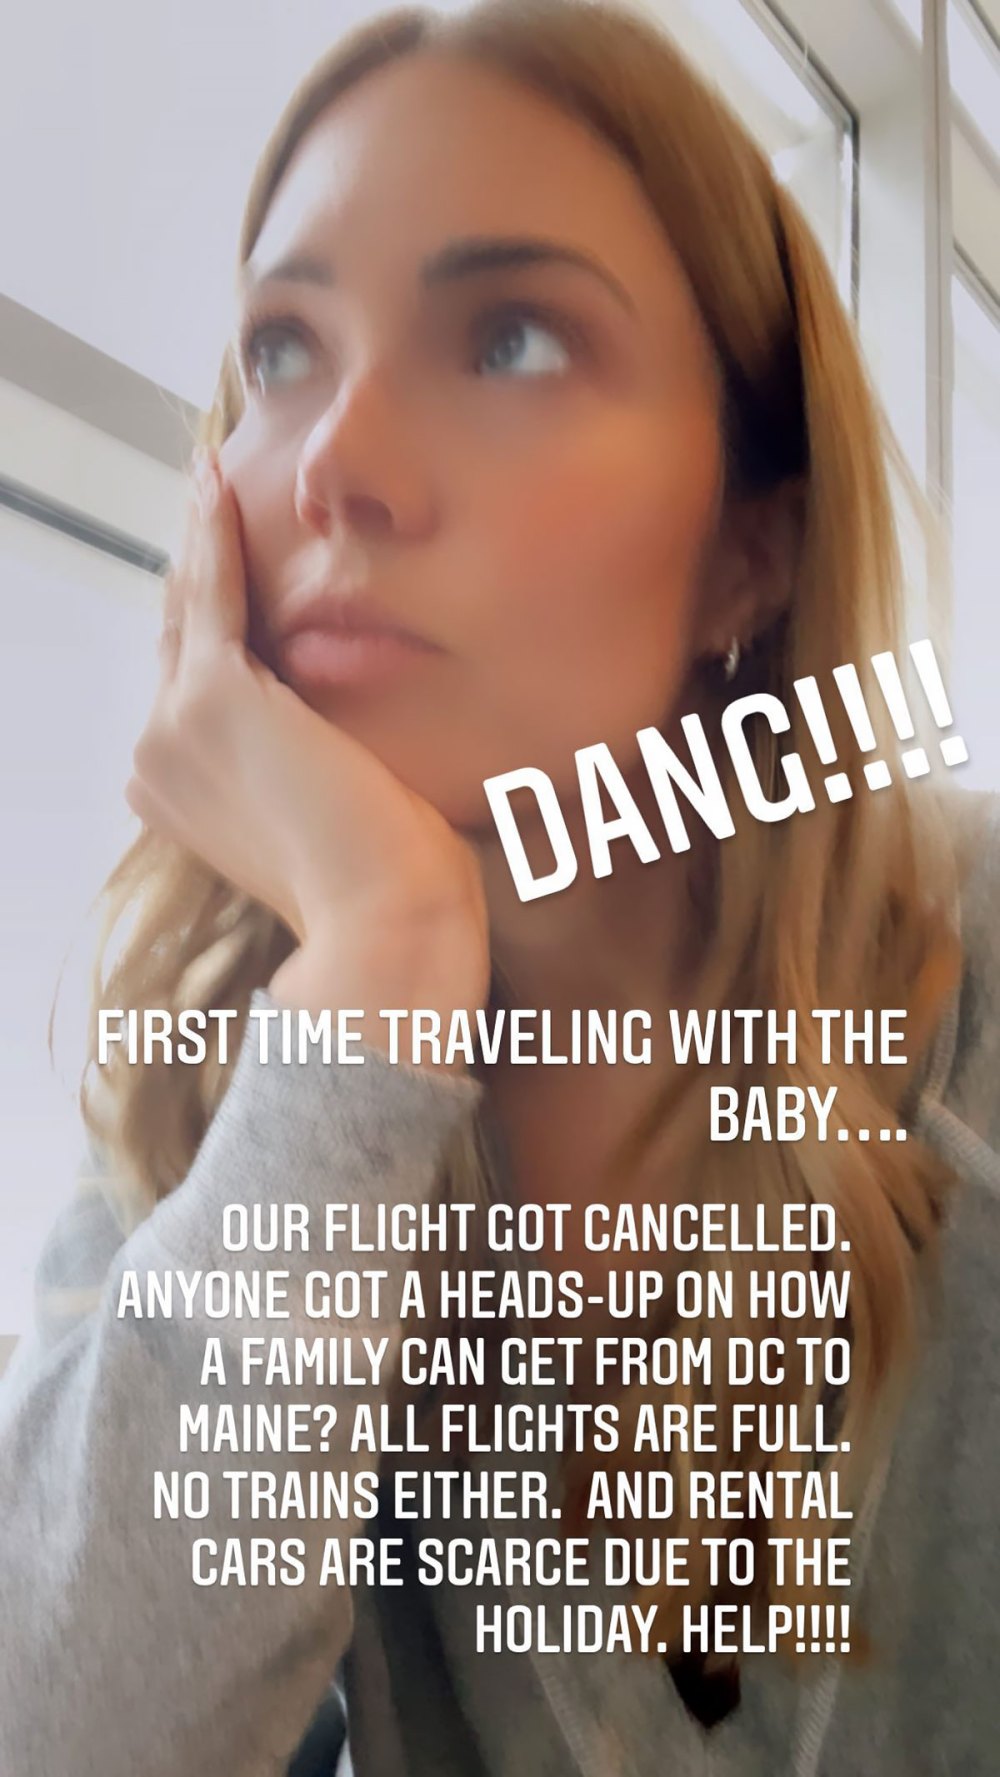 Mandy Moore Asks for ‘Help’ Amid Canceled Flight, Says Son Gus Is ‘Freaking Out'